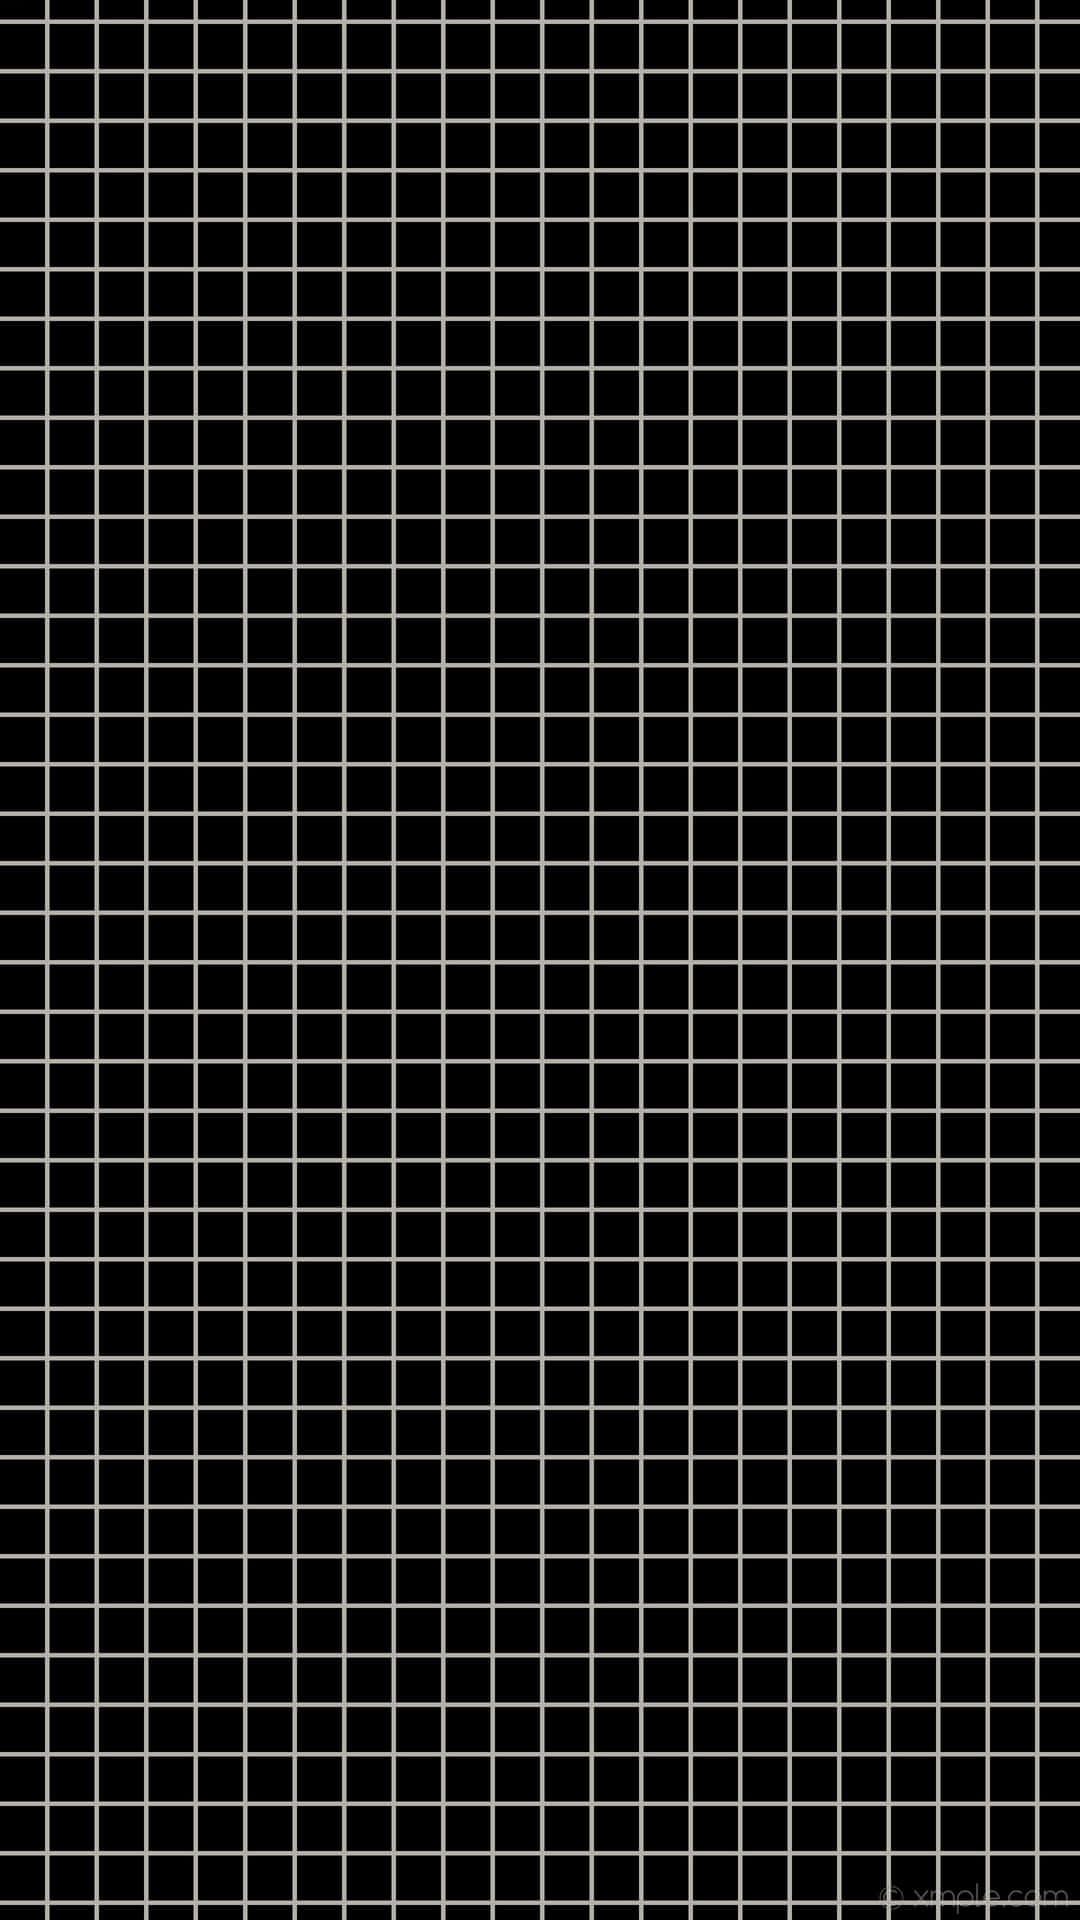 An abstract grid pattern displayed on an iPhone Wallpaper